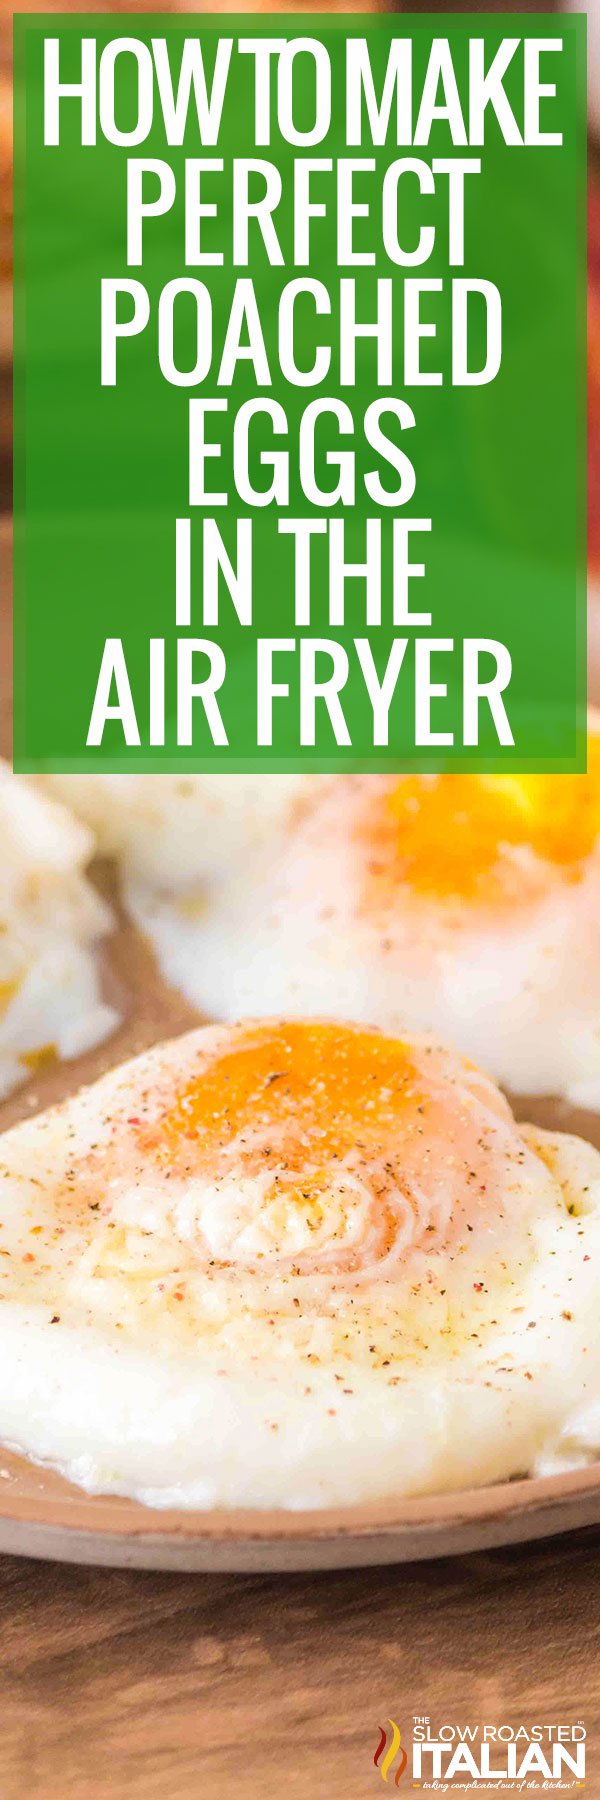 How To Make Perfect Poached Eggs in the Air Fryer